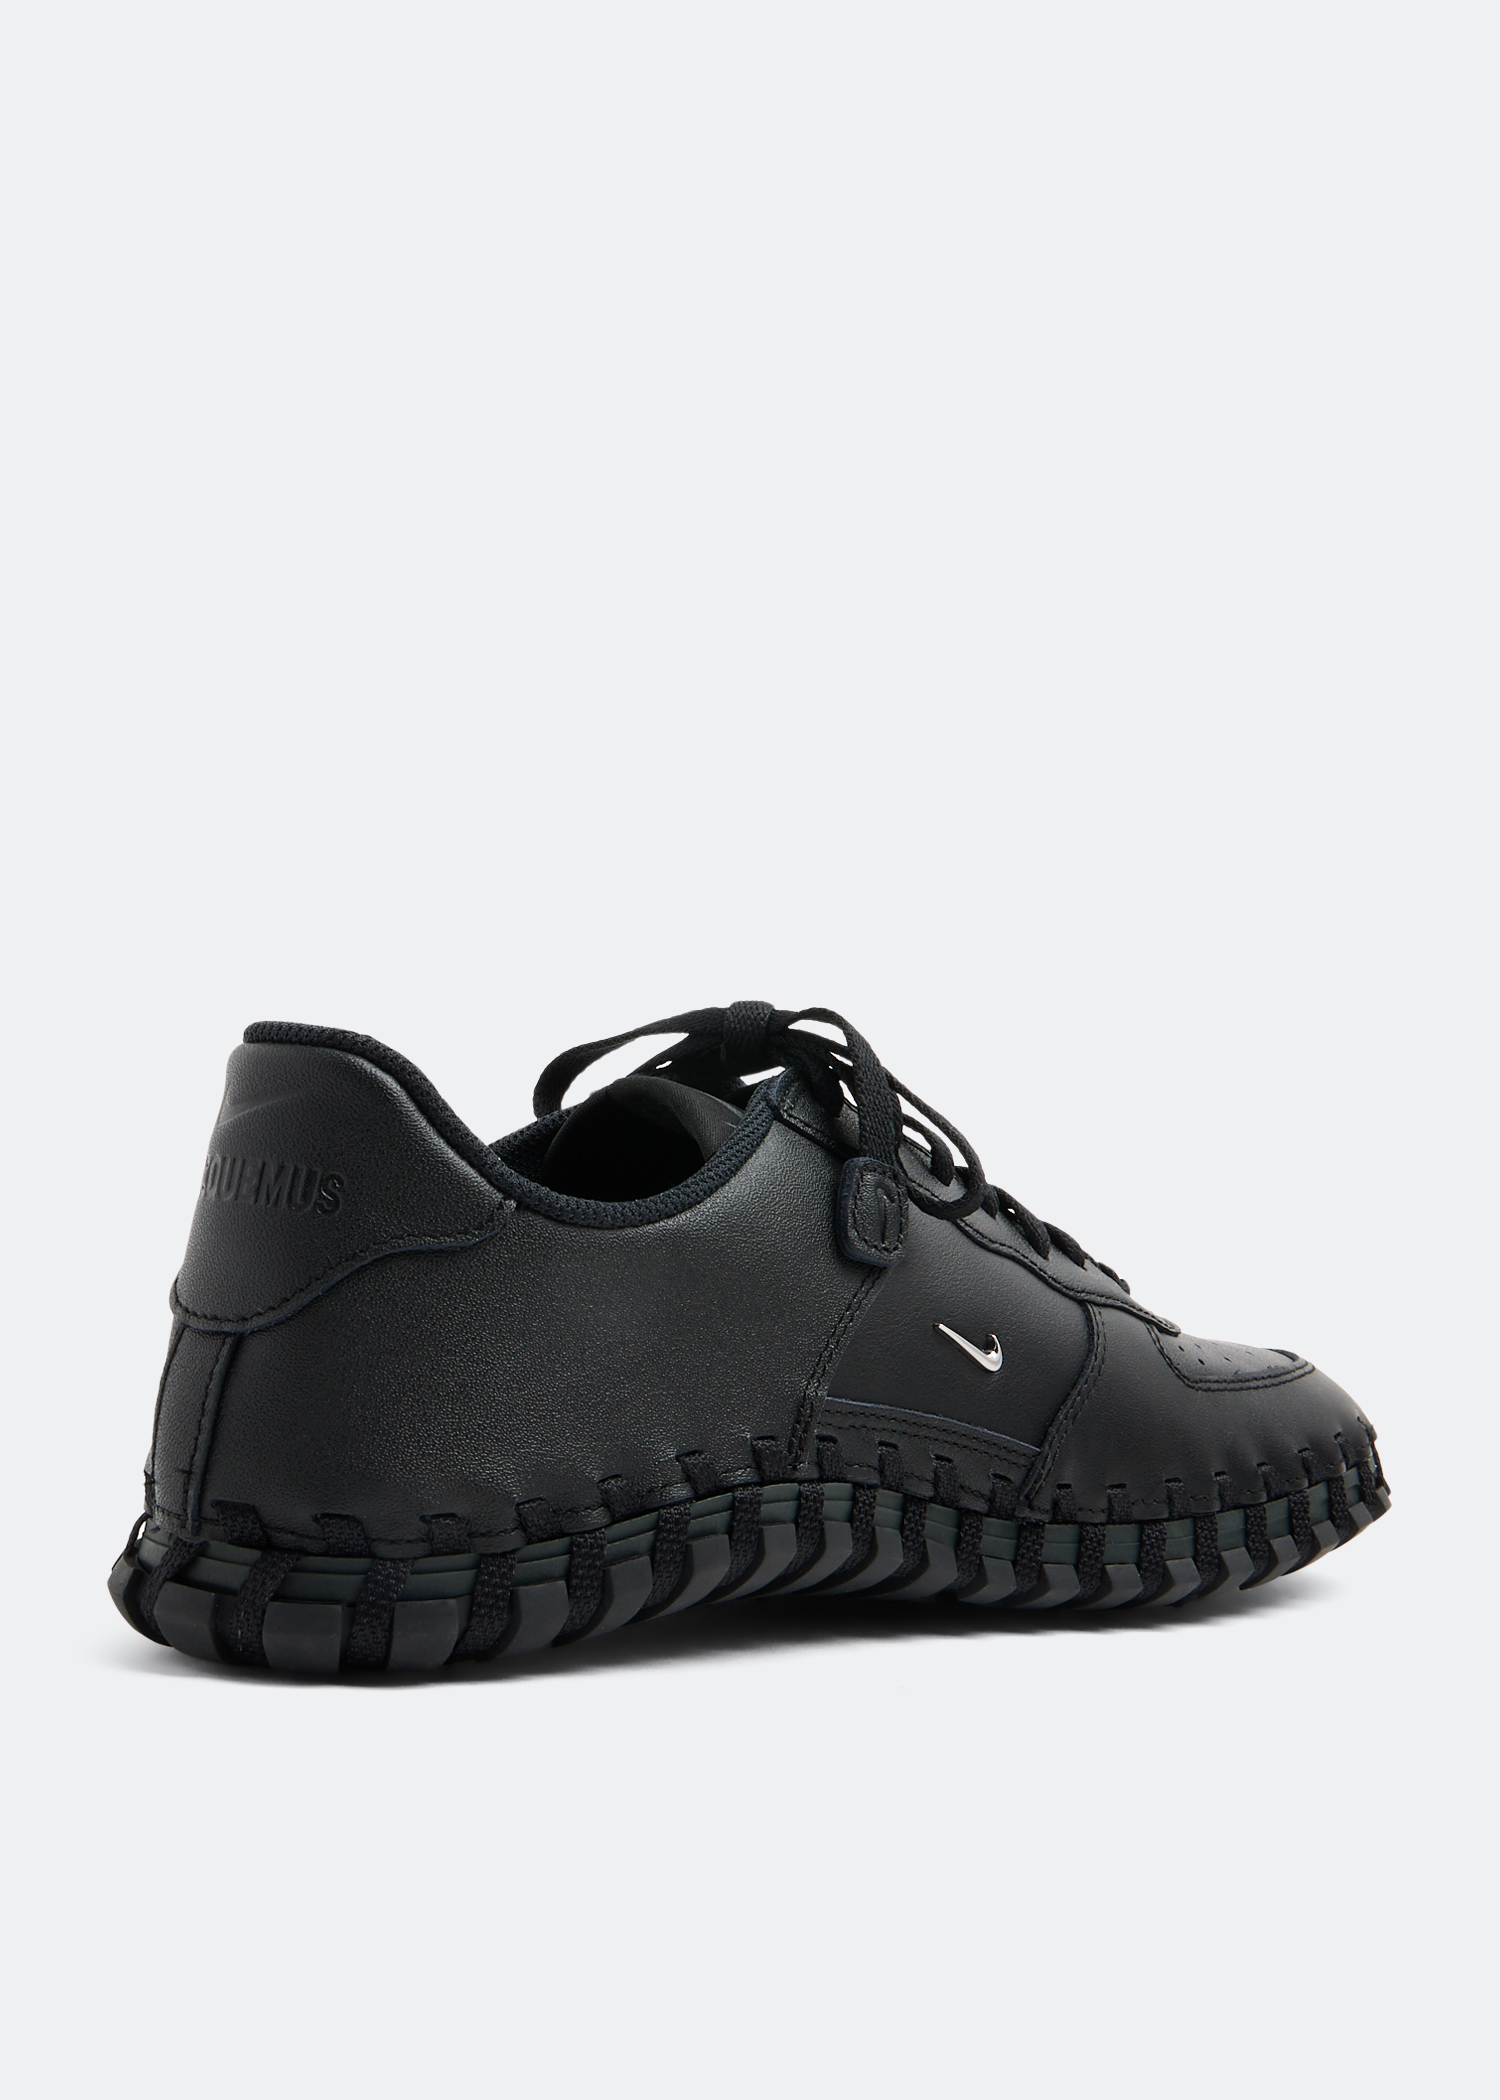 Nike x Jacquemus J Force 1 Low LX SP sneakers for Women - Black in